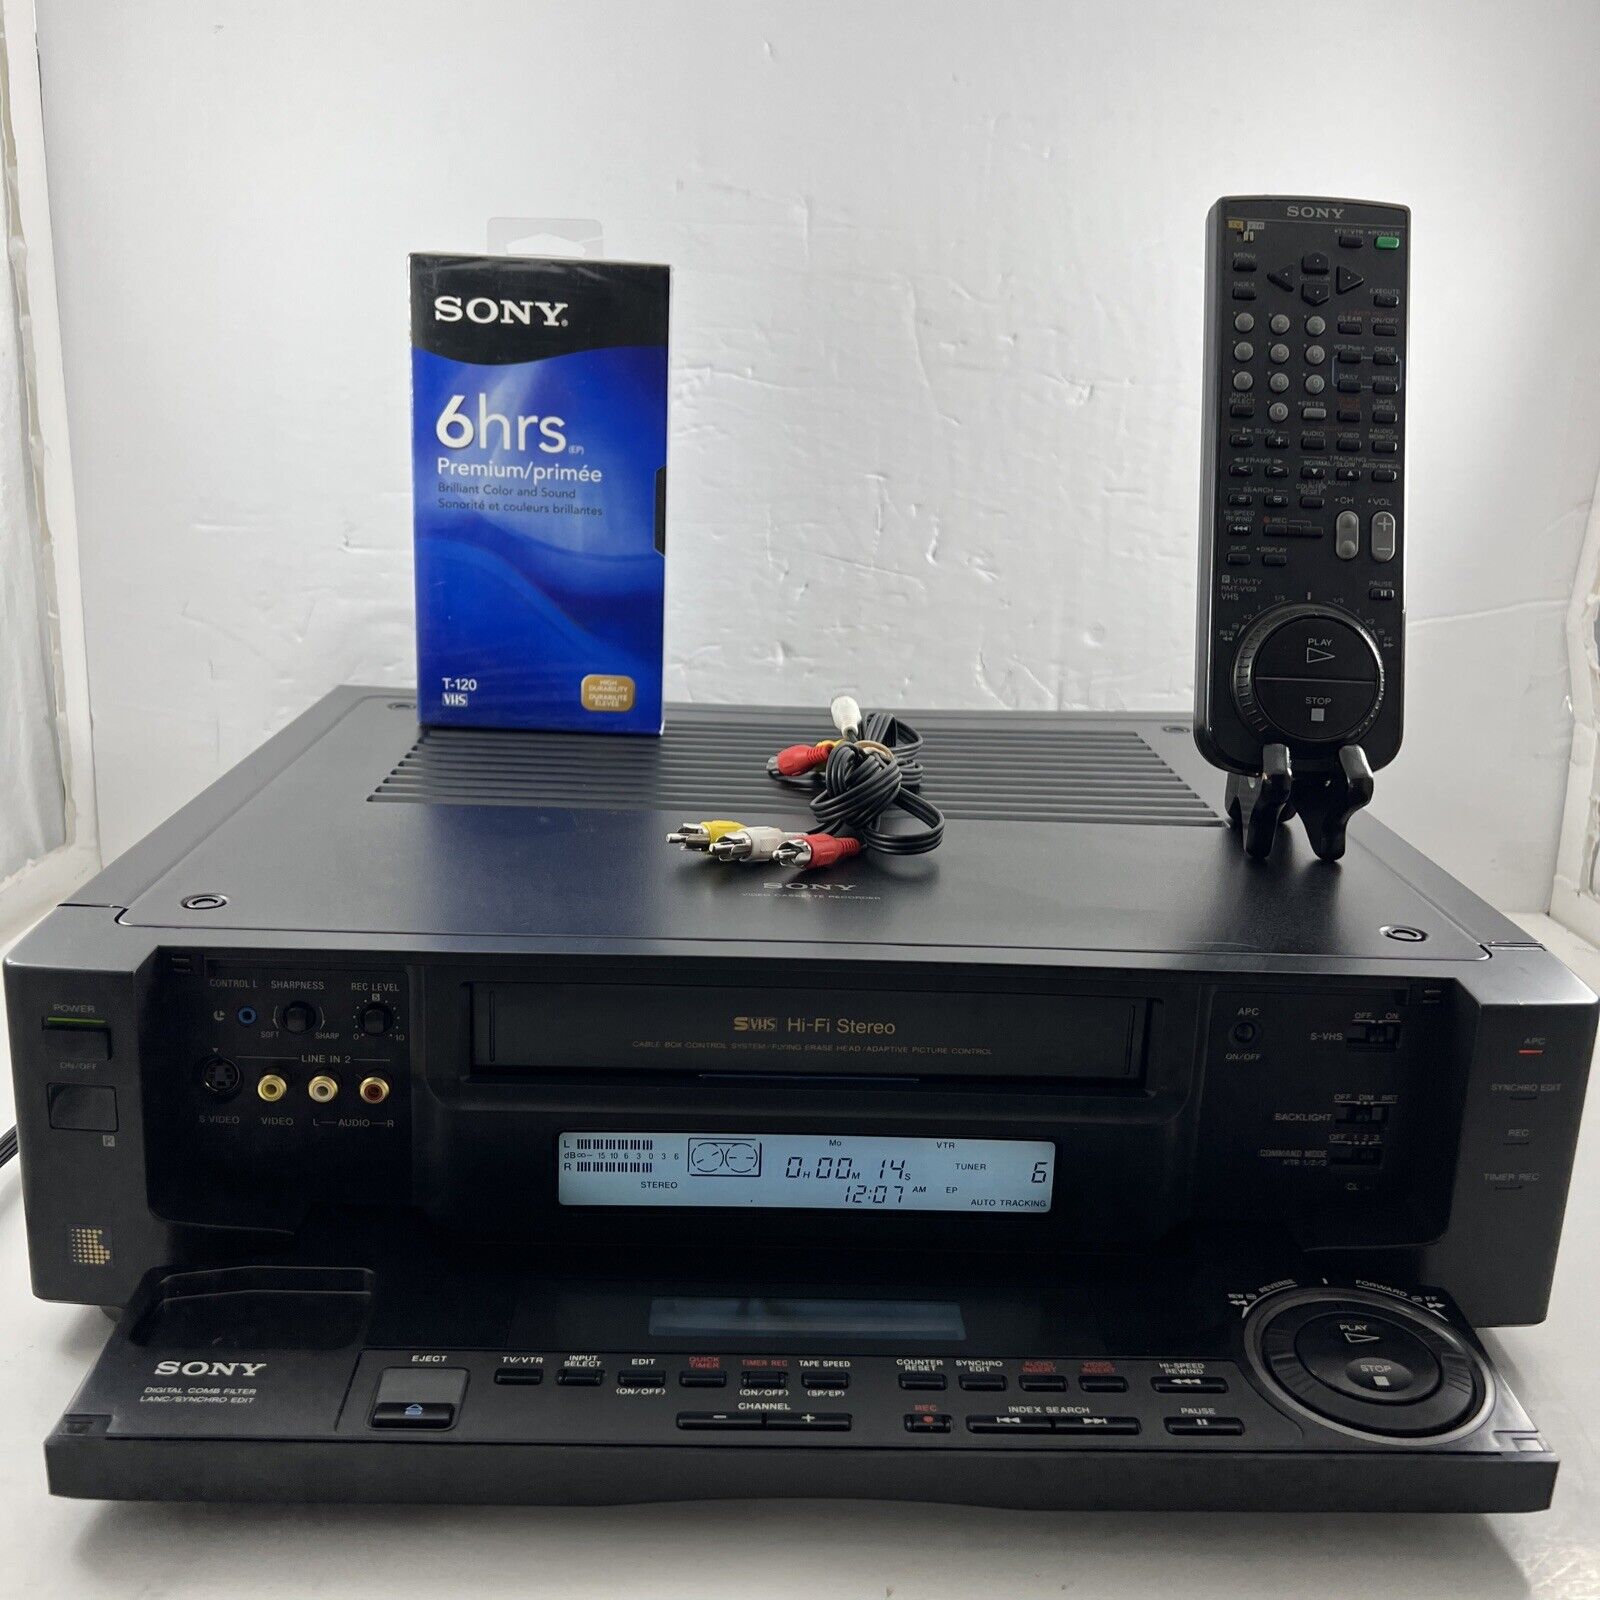 Sony Slv-r1000 Super S-vhs Svhs Player Recorder Hifi Stereo Vcr Deck/serviced